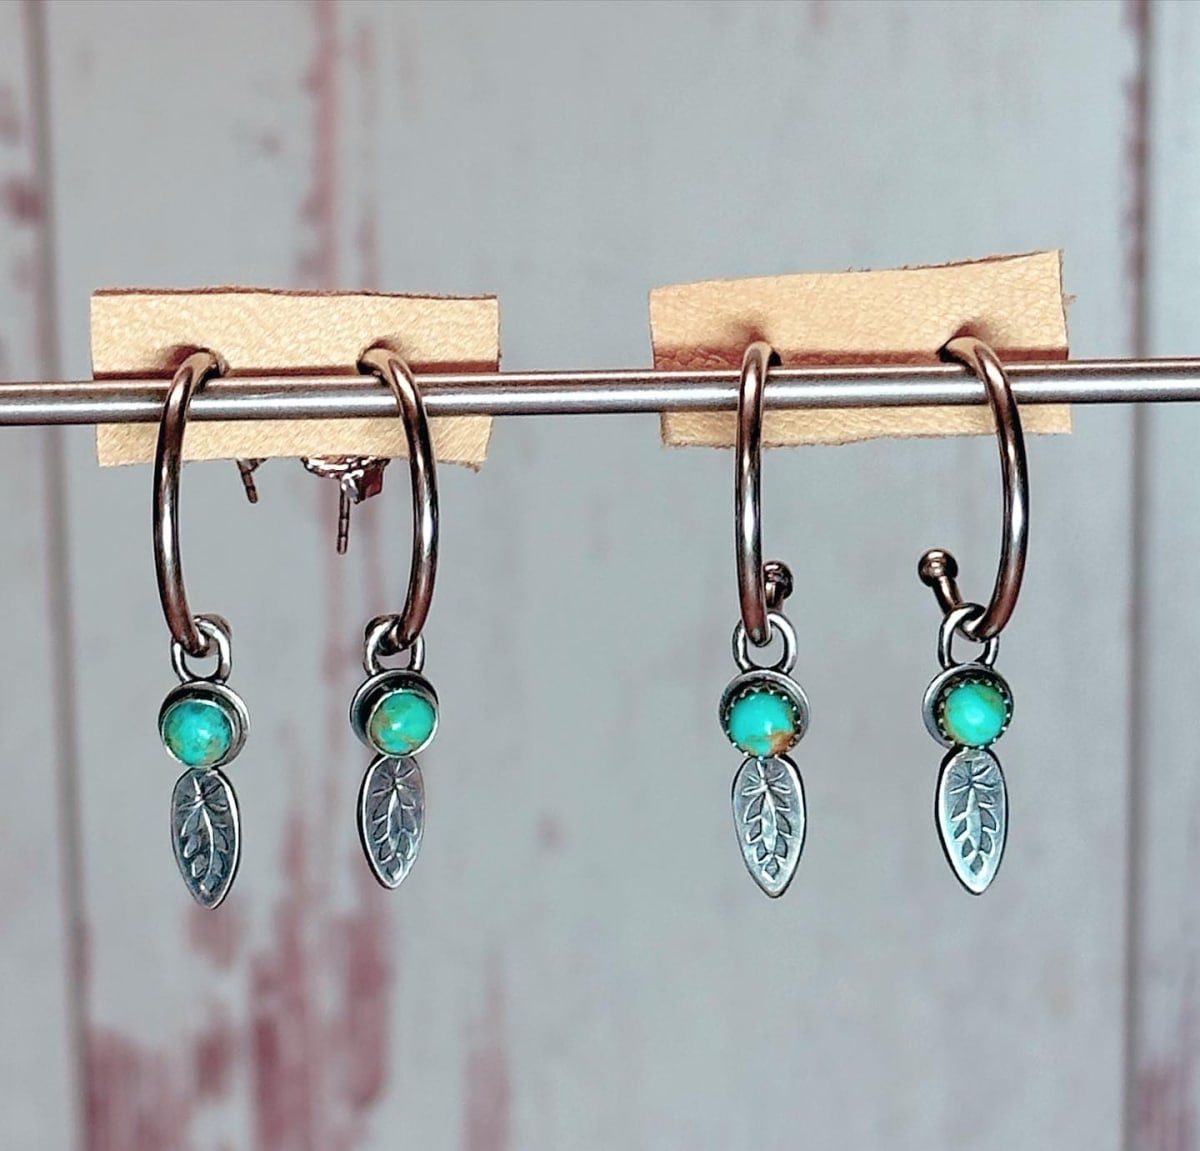 "Turquoise Feather Charmed Hoops" - Kingman Turquoise with Smooth Bezel by Shasta Brooks  Image: All Art © Shasta Brooks Studio LLC